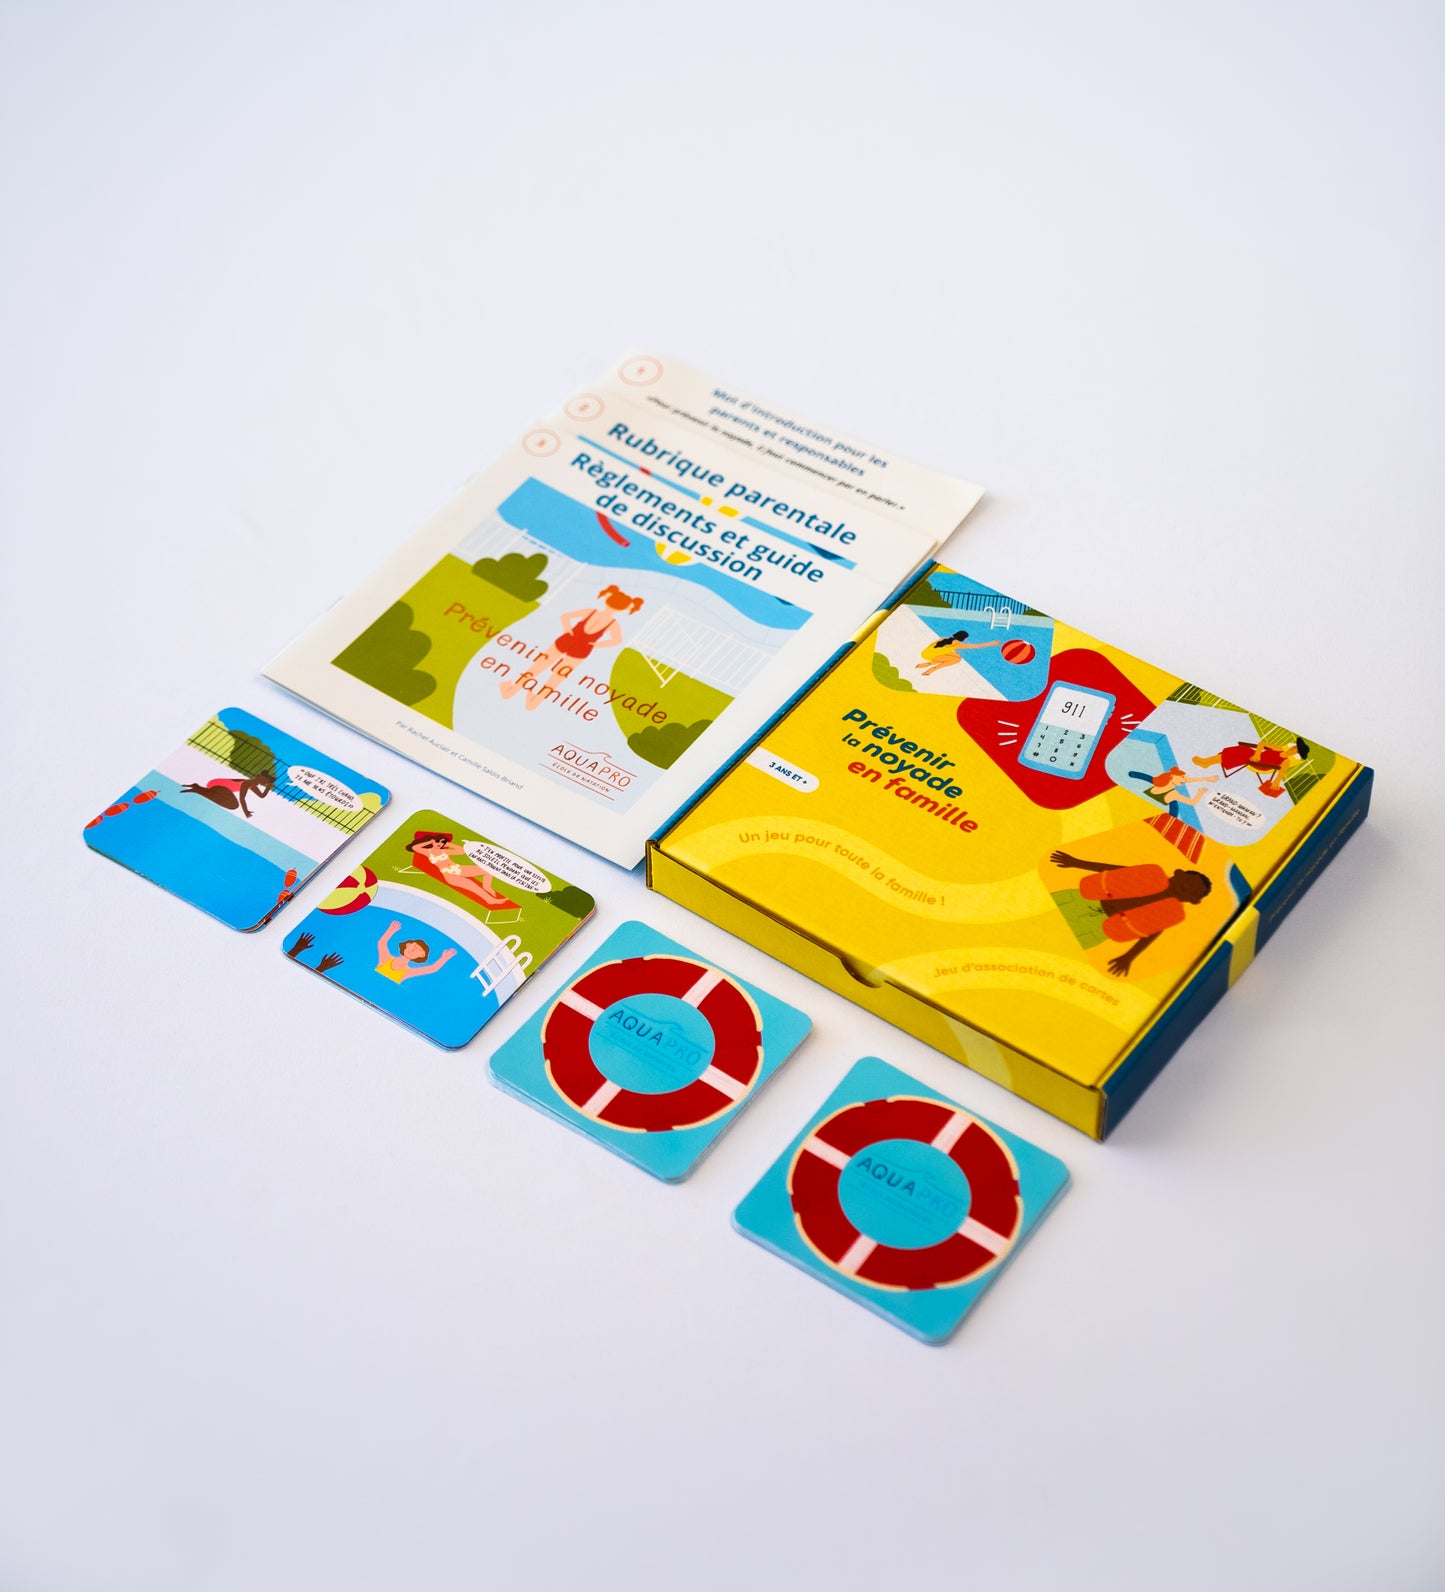 EDUCATIONAL GAME - Prevent drowning with your family